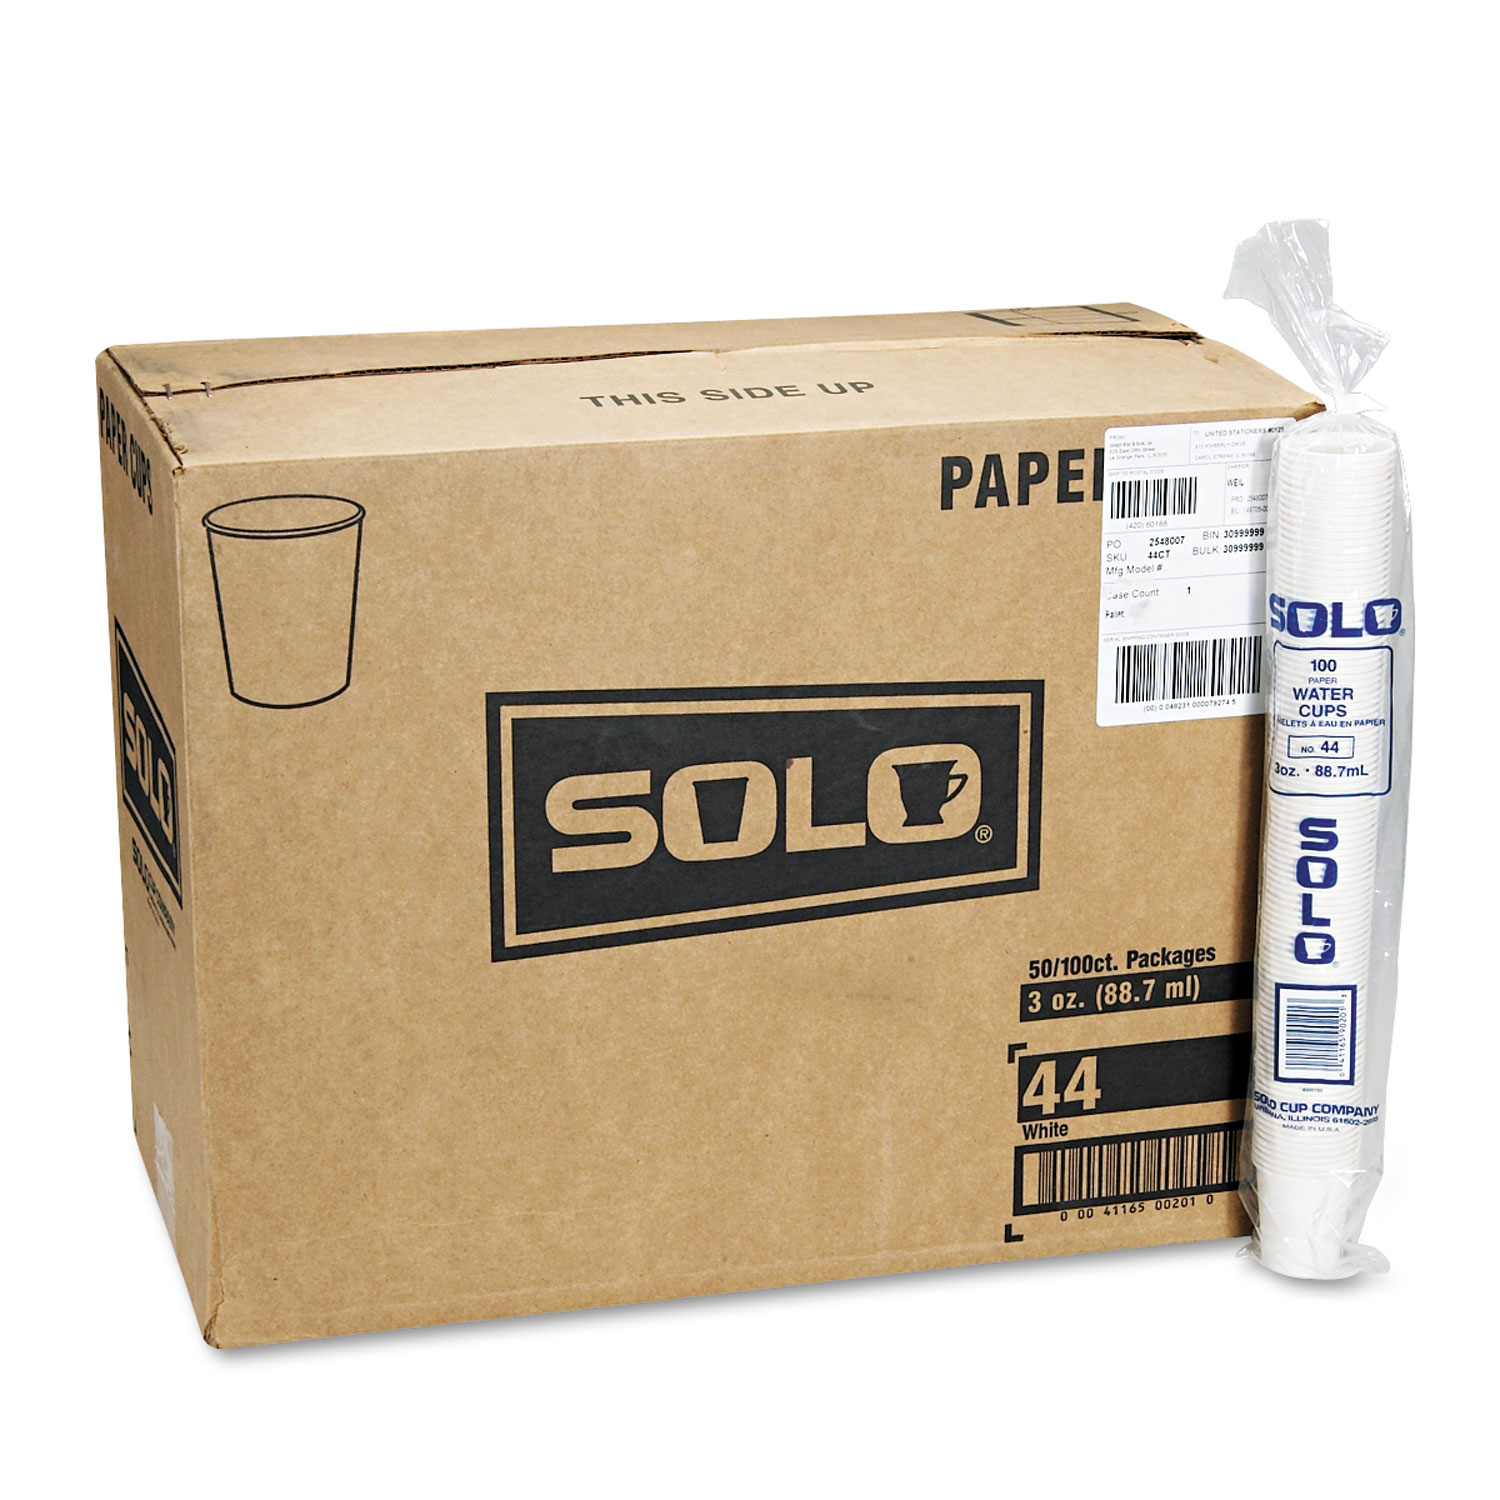  Solo 5T3-N0196 83 oz White Paper Bucket (Case of 100) : Health  & Household